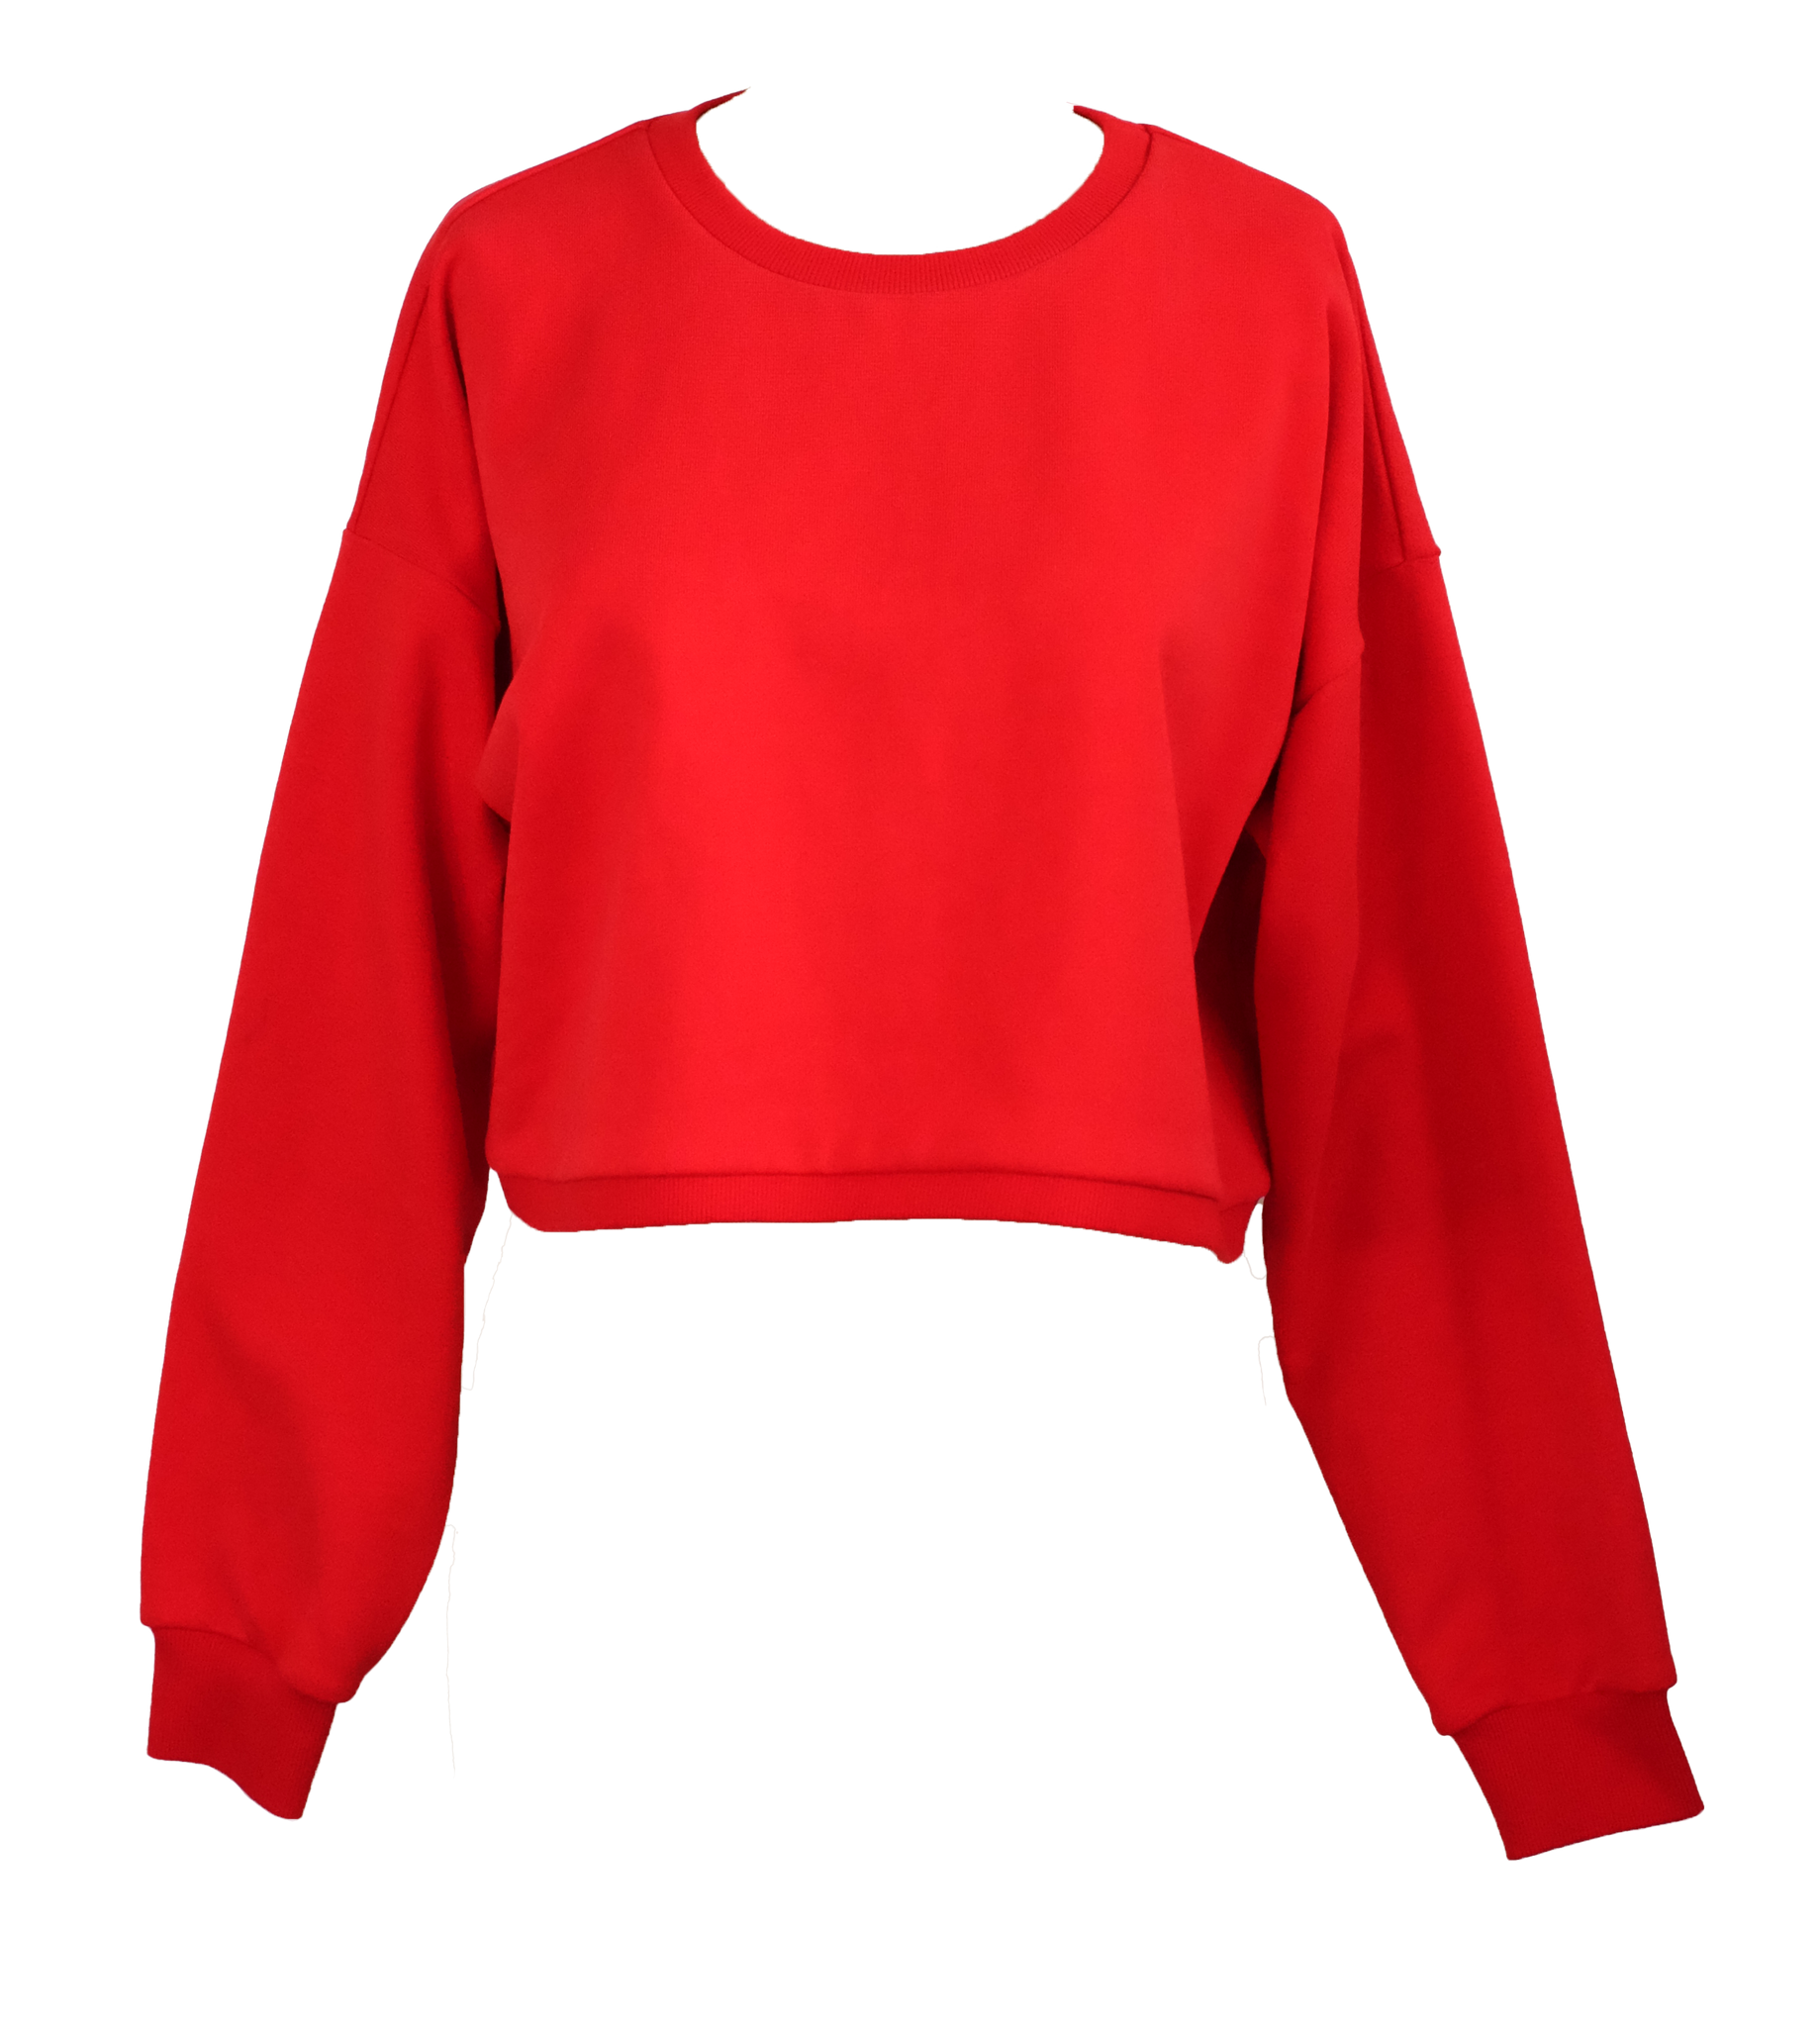 Santi Sweater in Crimson French Terry- Size Small SAMPLE